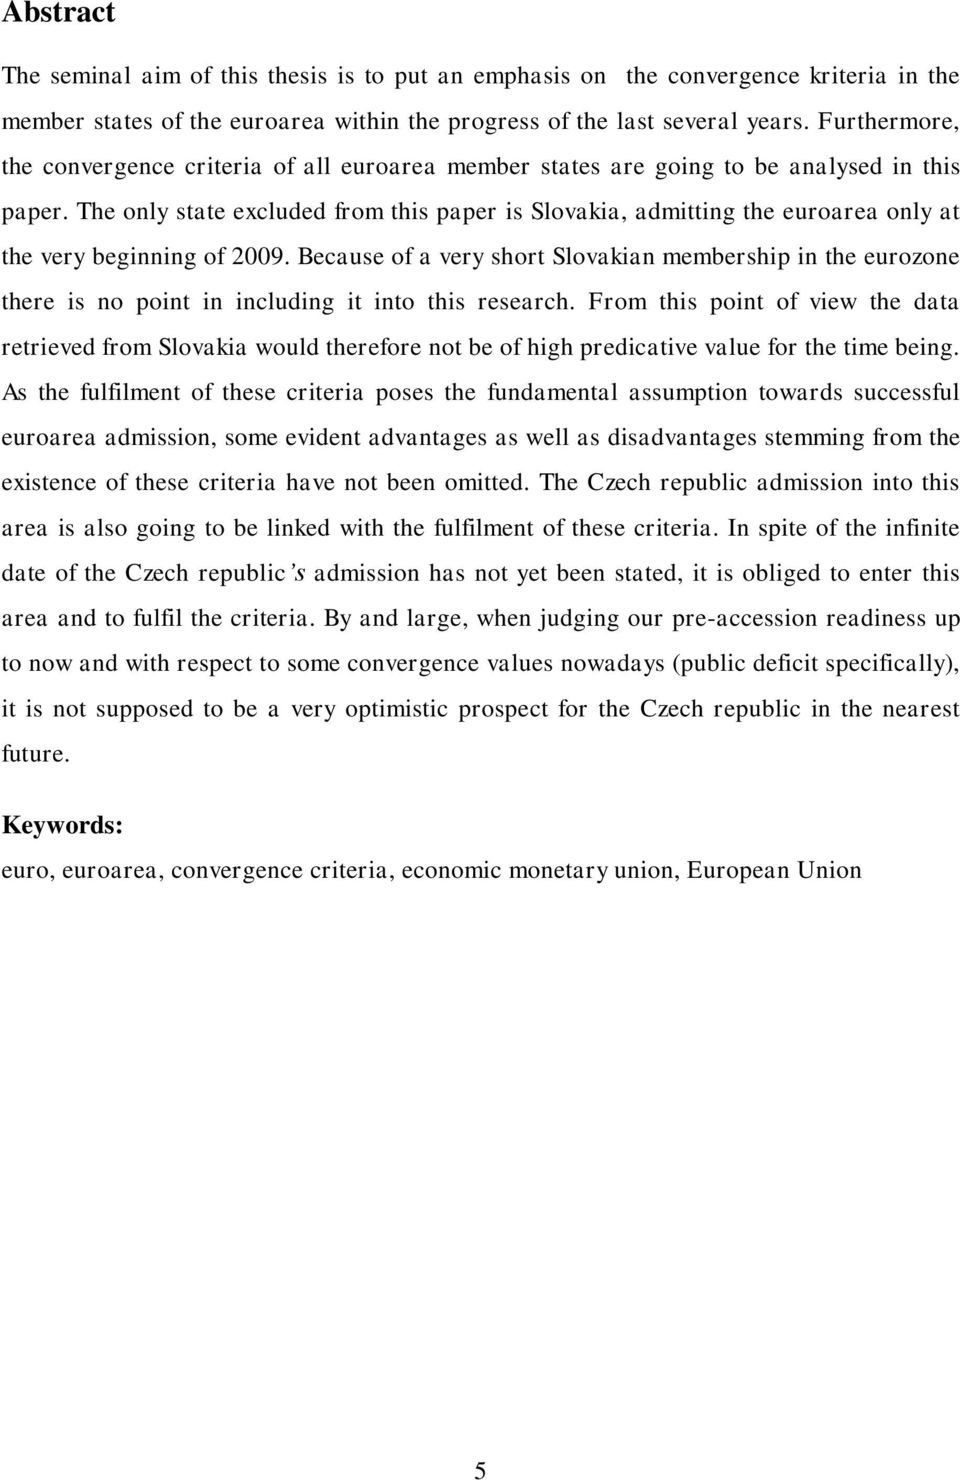 The only state excluded from this paper is Slovakia, admitting the euroarea only at the very beginning of 2009.